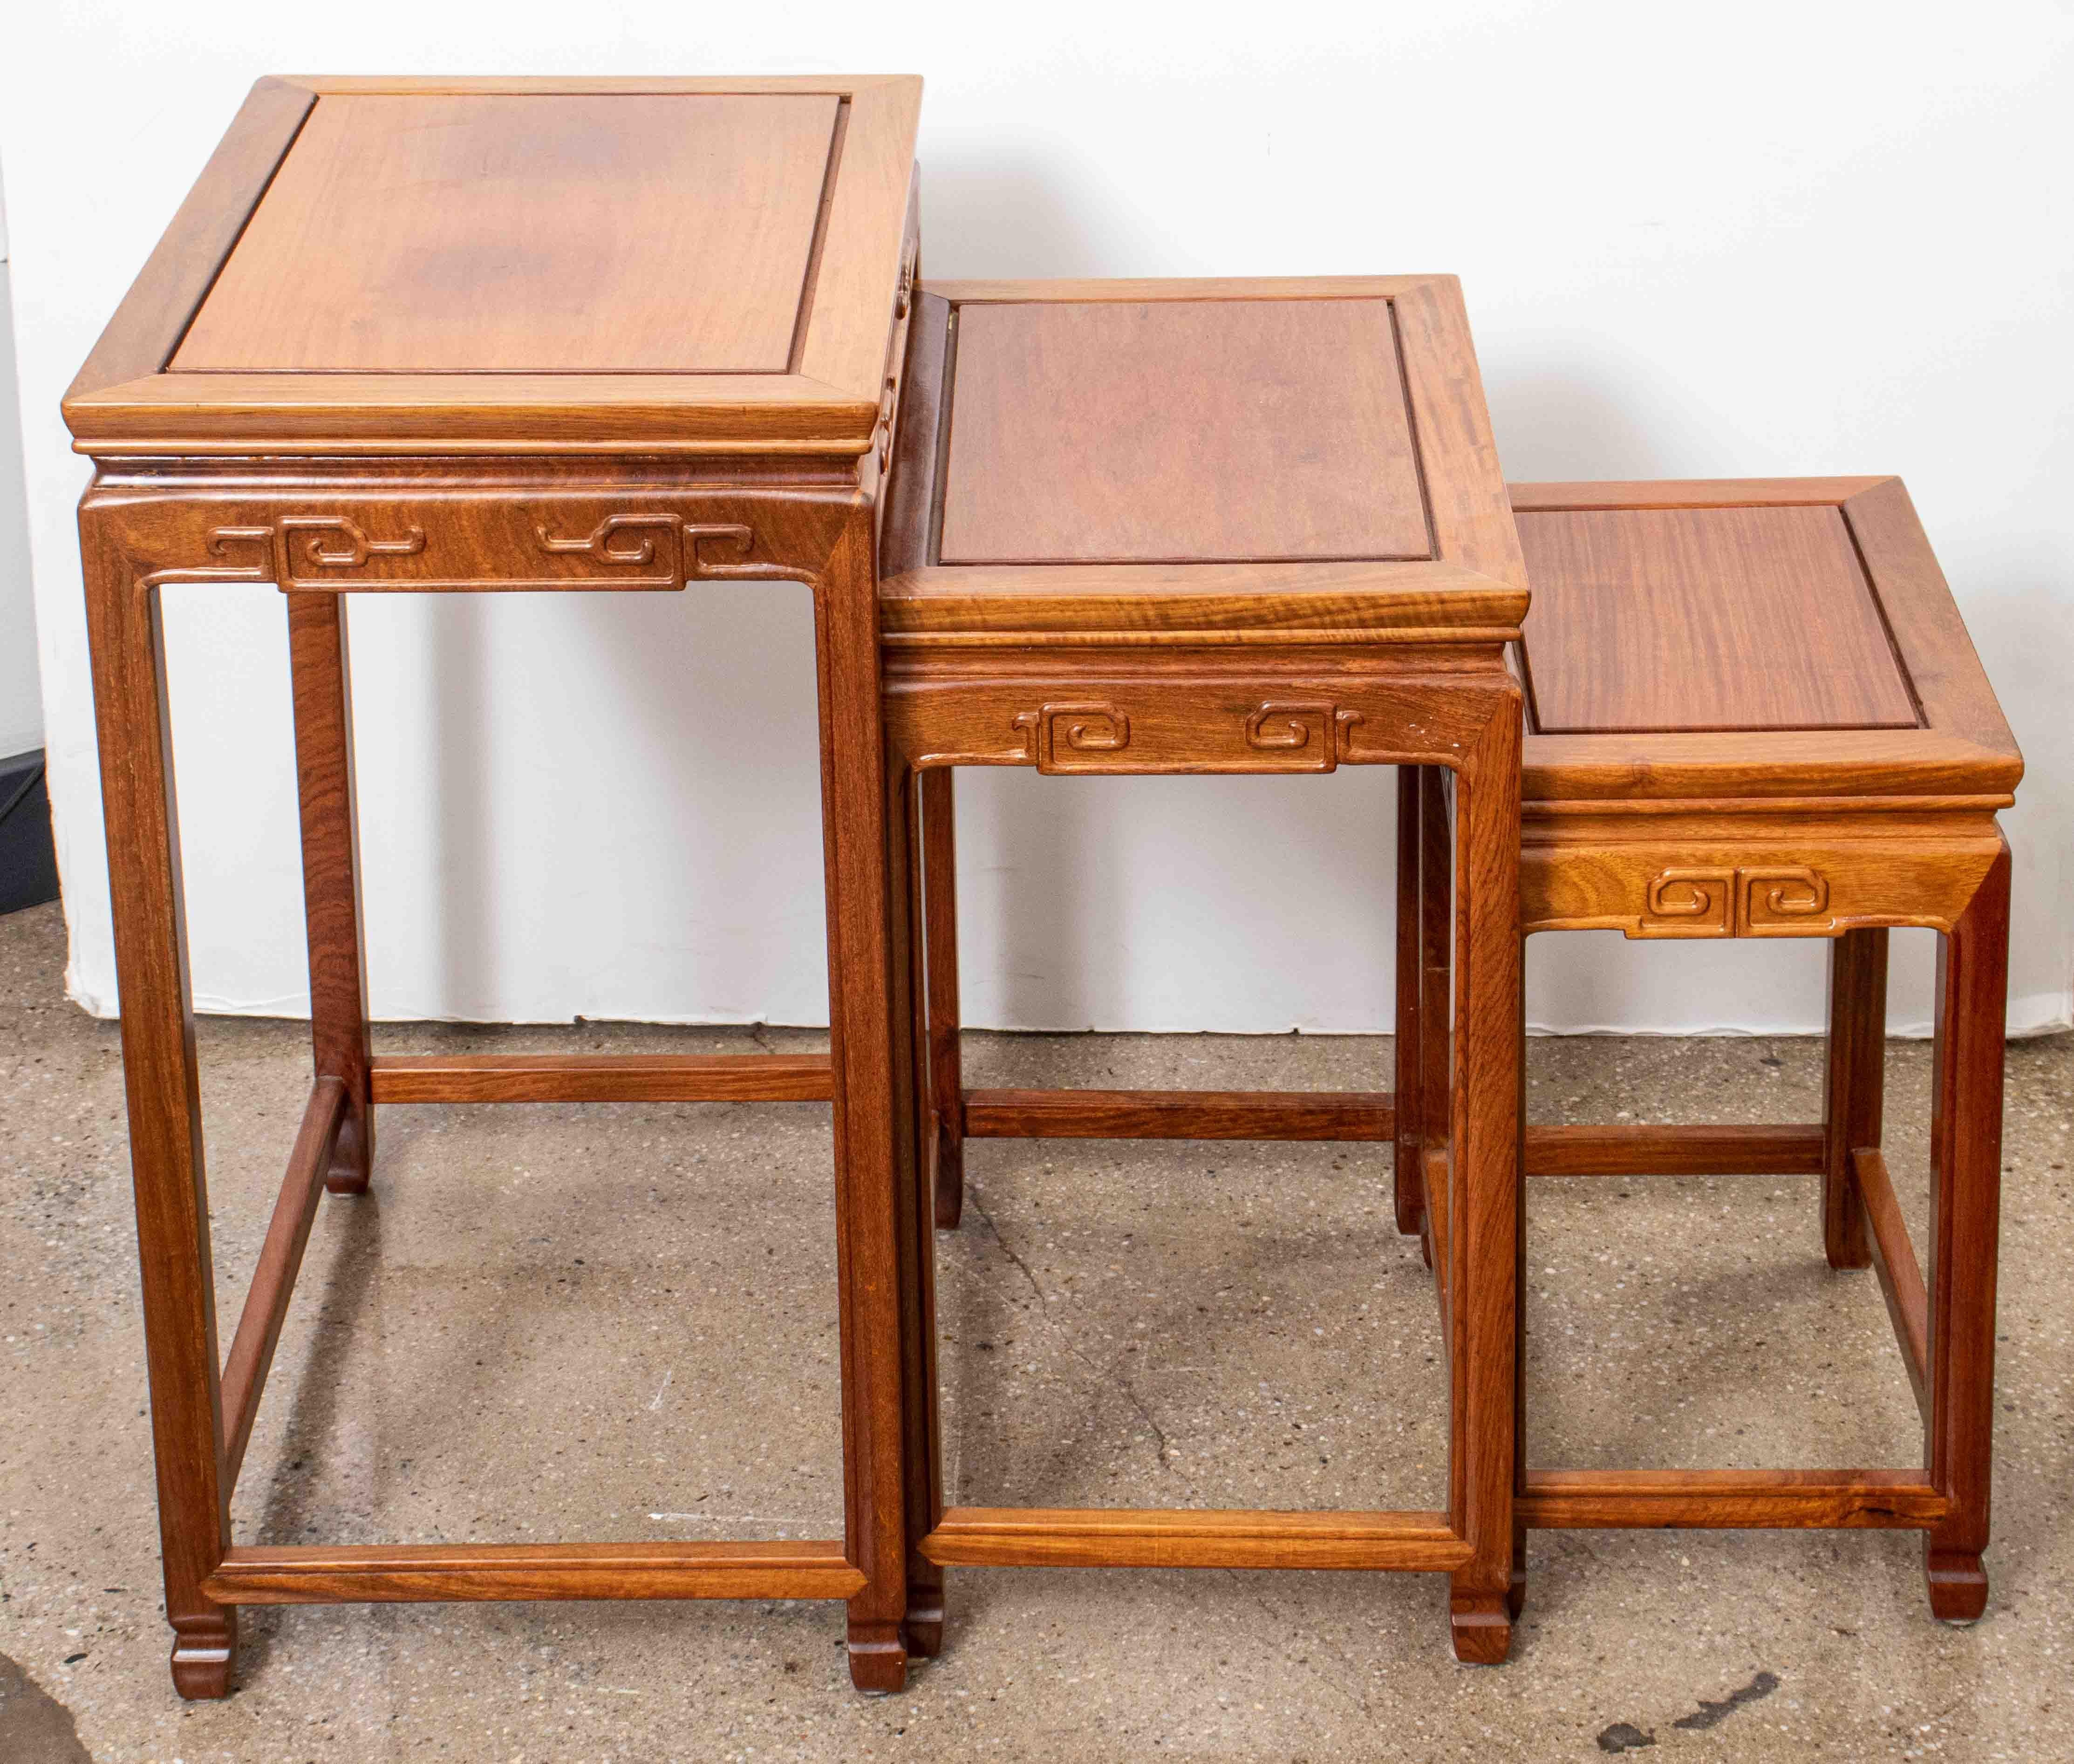 Set of three Chinese golden-honey-tone hardwood nesting tables, each with carved scrolling design upon apron and four slender legs. 
Largest: 26.25